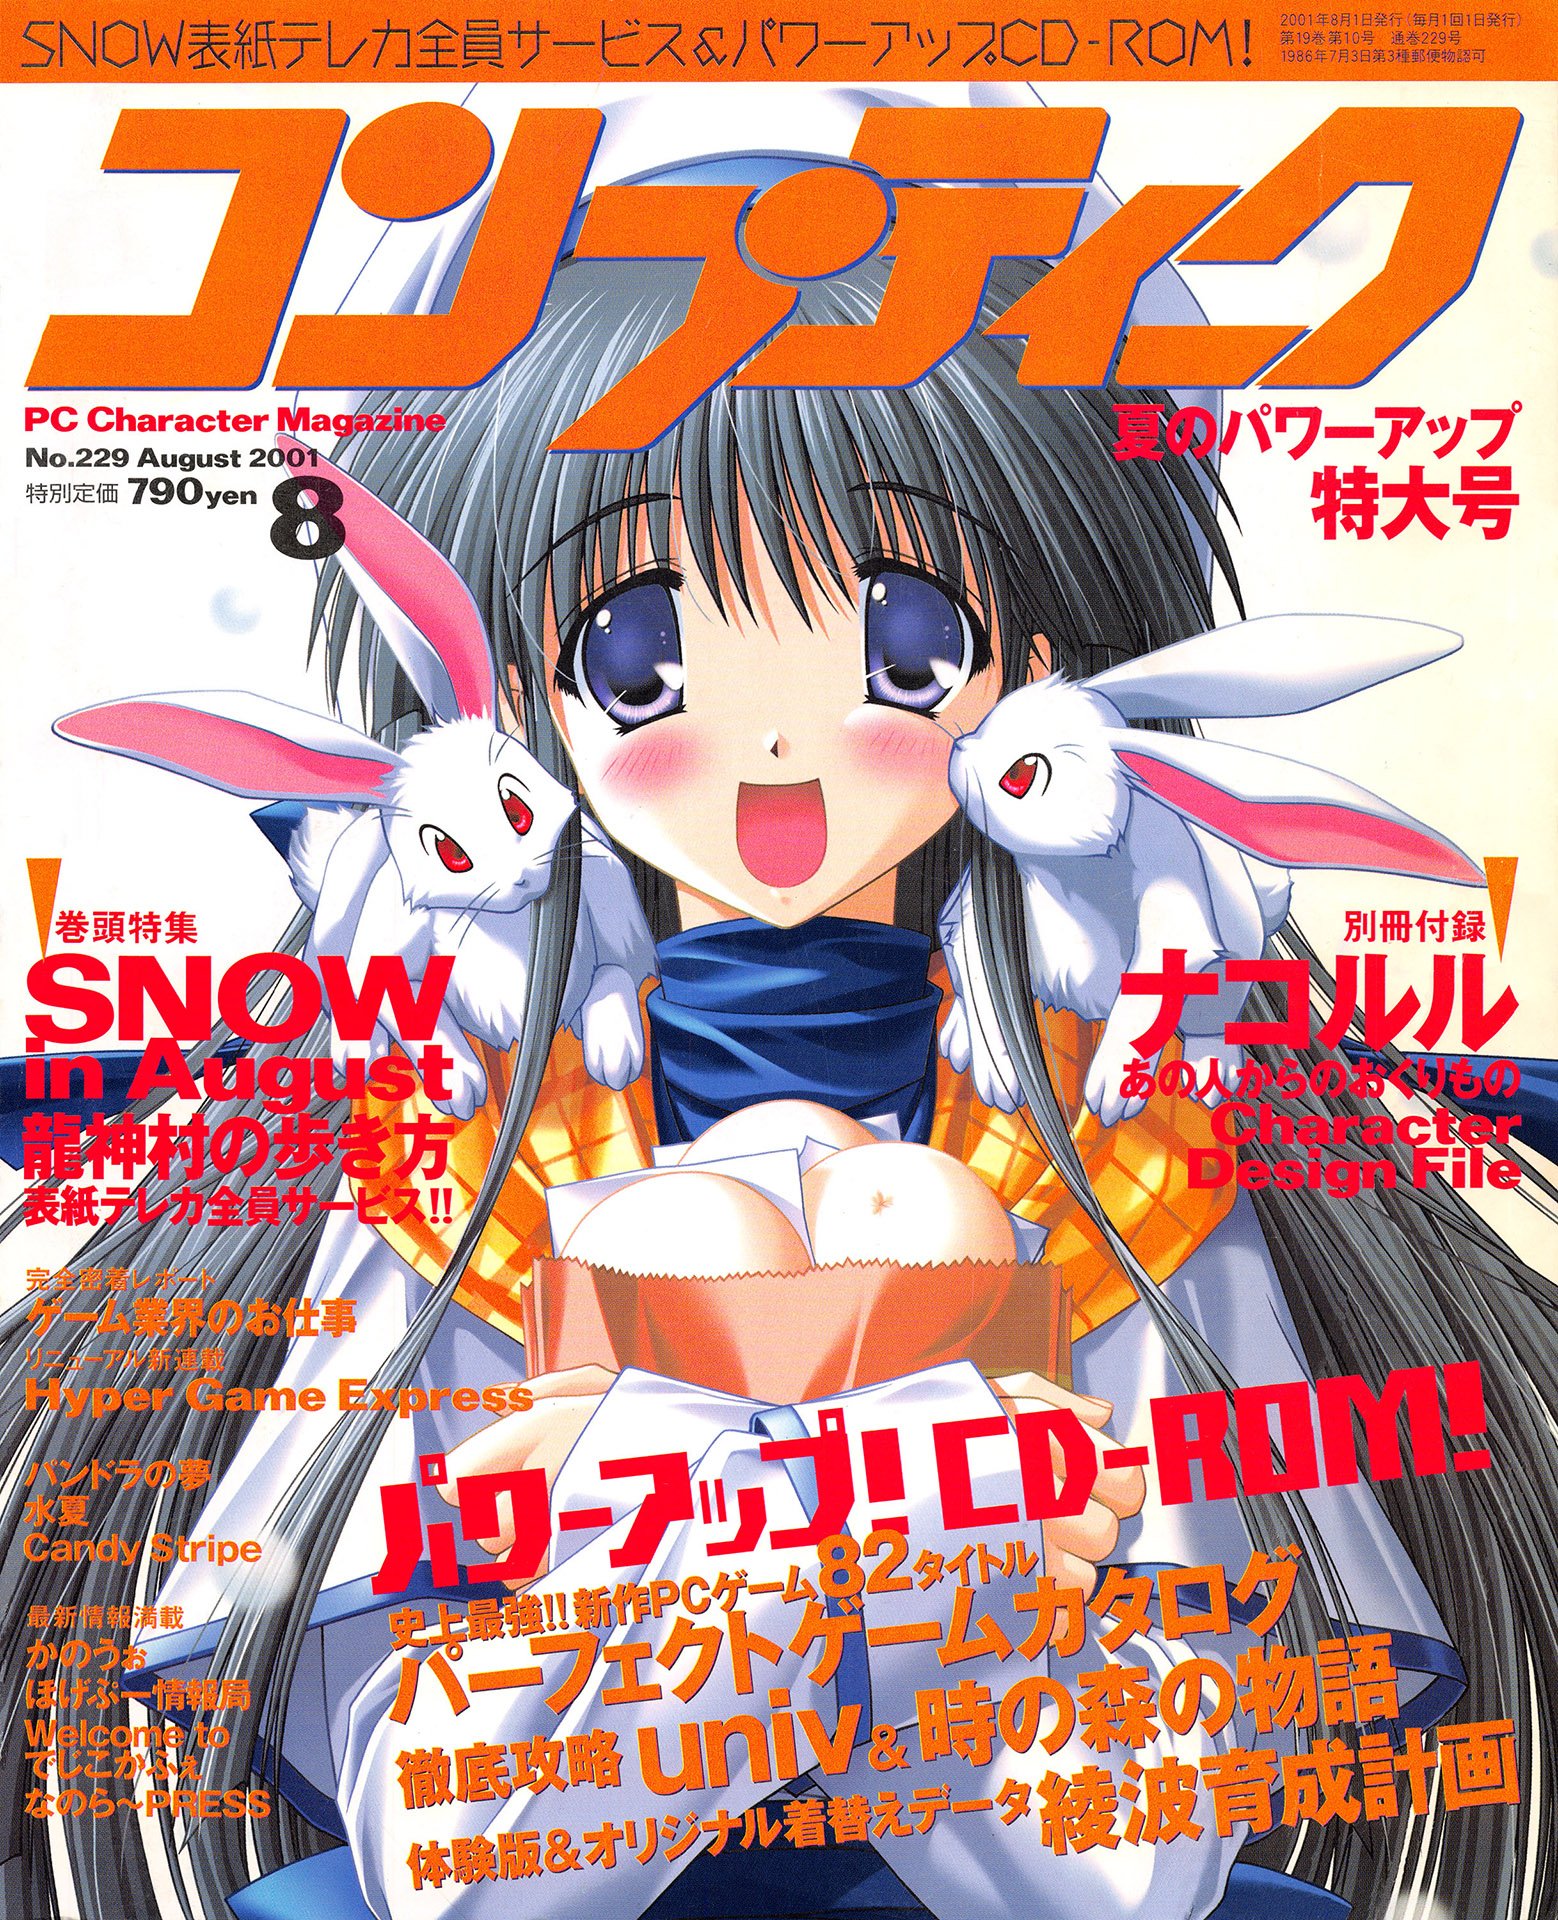 More information about "Comptiq No.229 (August 2001)"